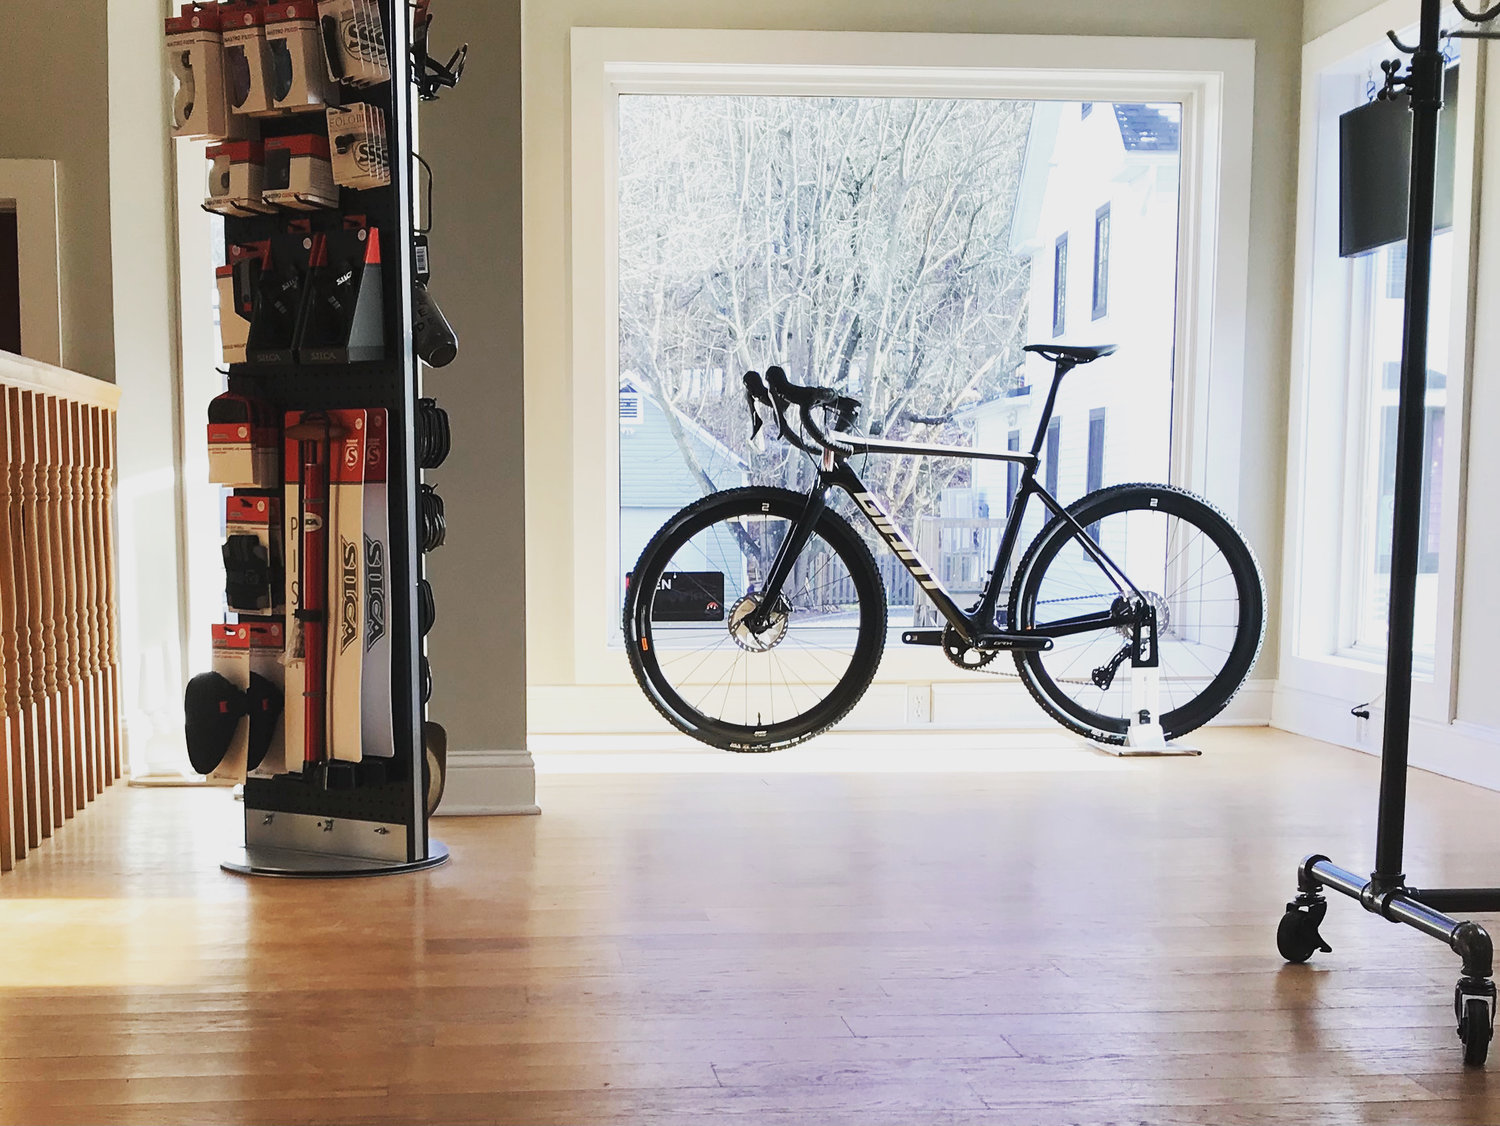 Originally a motorcycle mechanic, Jon Thorndike is an avid cyclist who decided to turn his hobby into a business. He and his wife, Kelly Lawler, want everyone to have access to the sport of cycling.